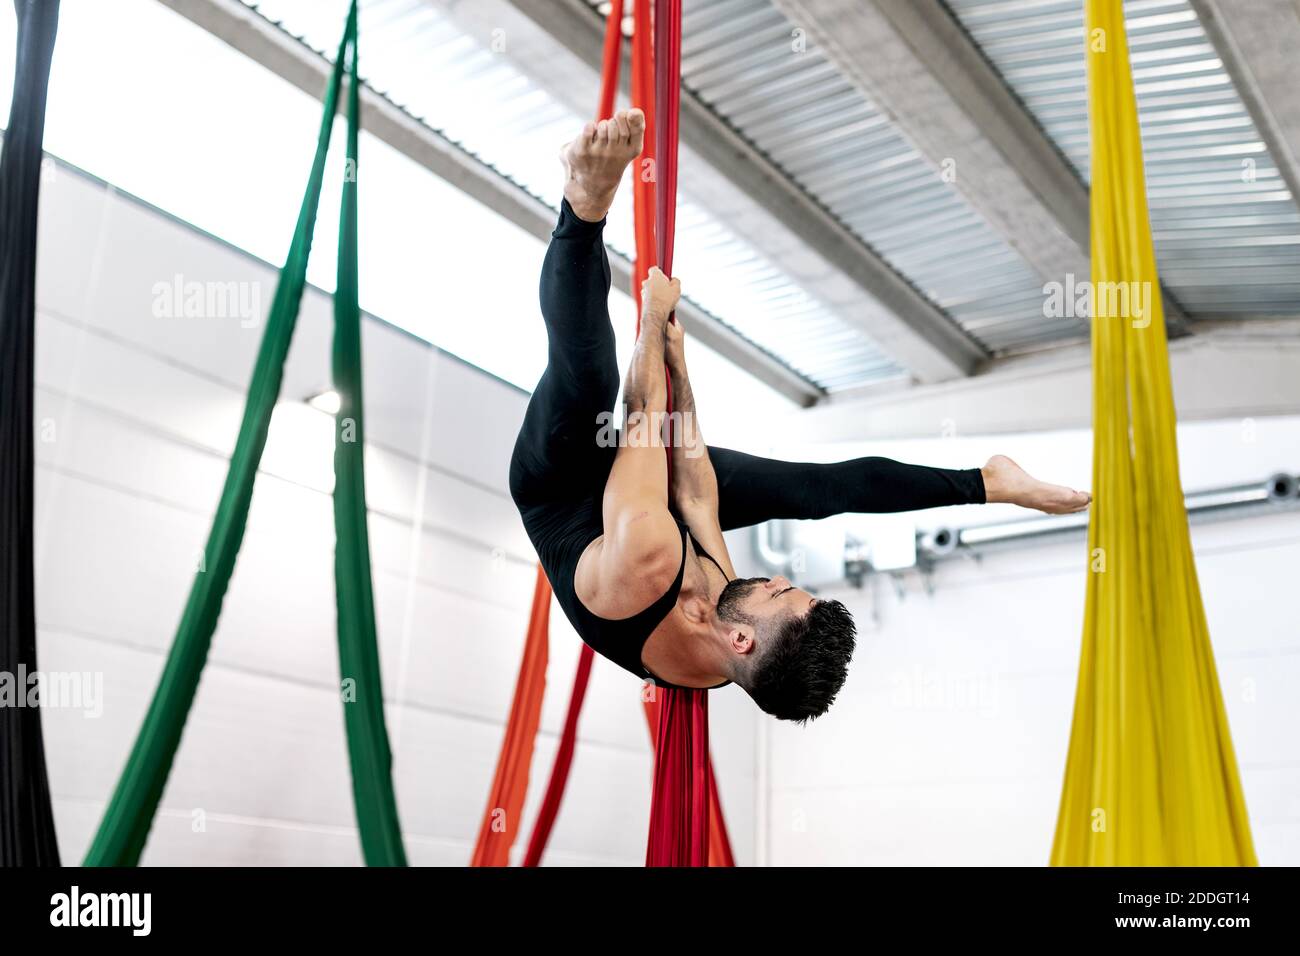 Bearded adult dancer in black leotard hanging upside down on aerial silk during rehearsal in studio Stock Photo